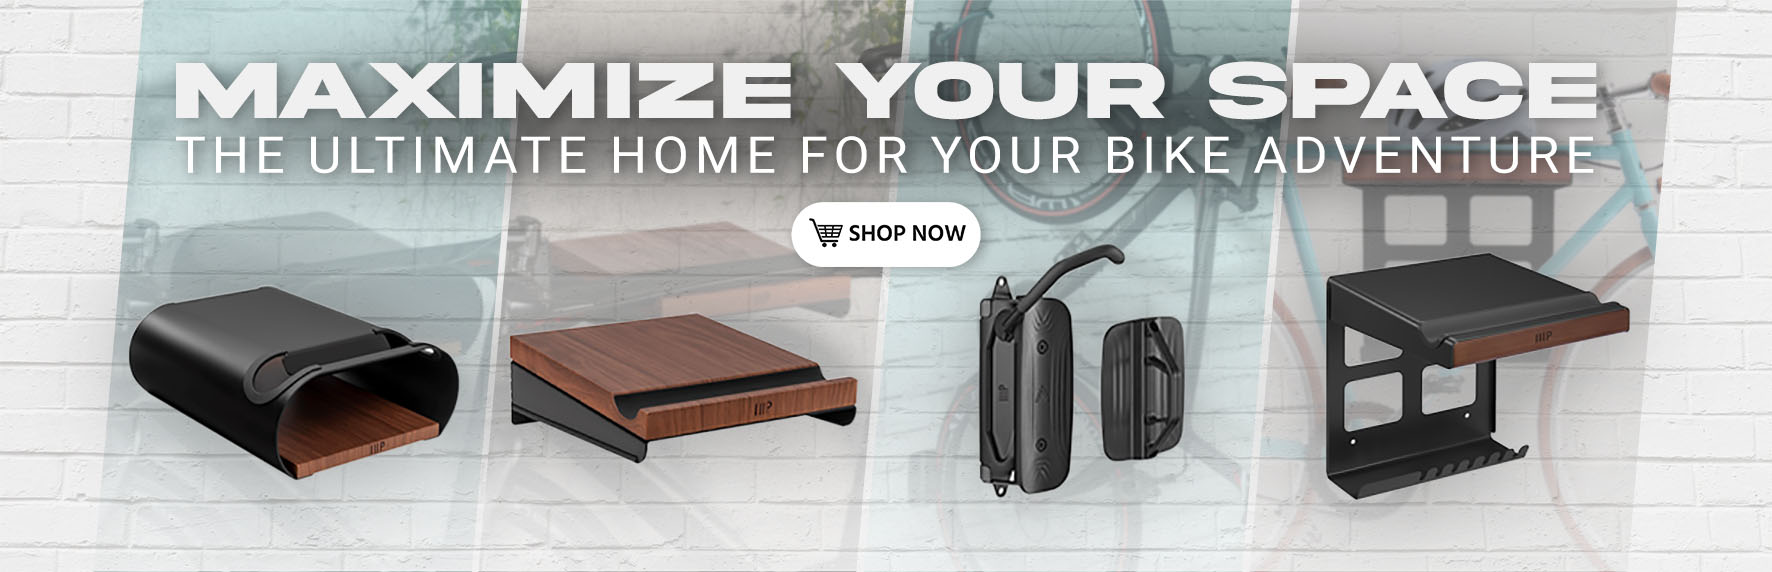 Maximize Your Space – The Ultimate Home for Your Bike Adventure! Shop Now